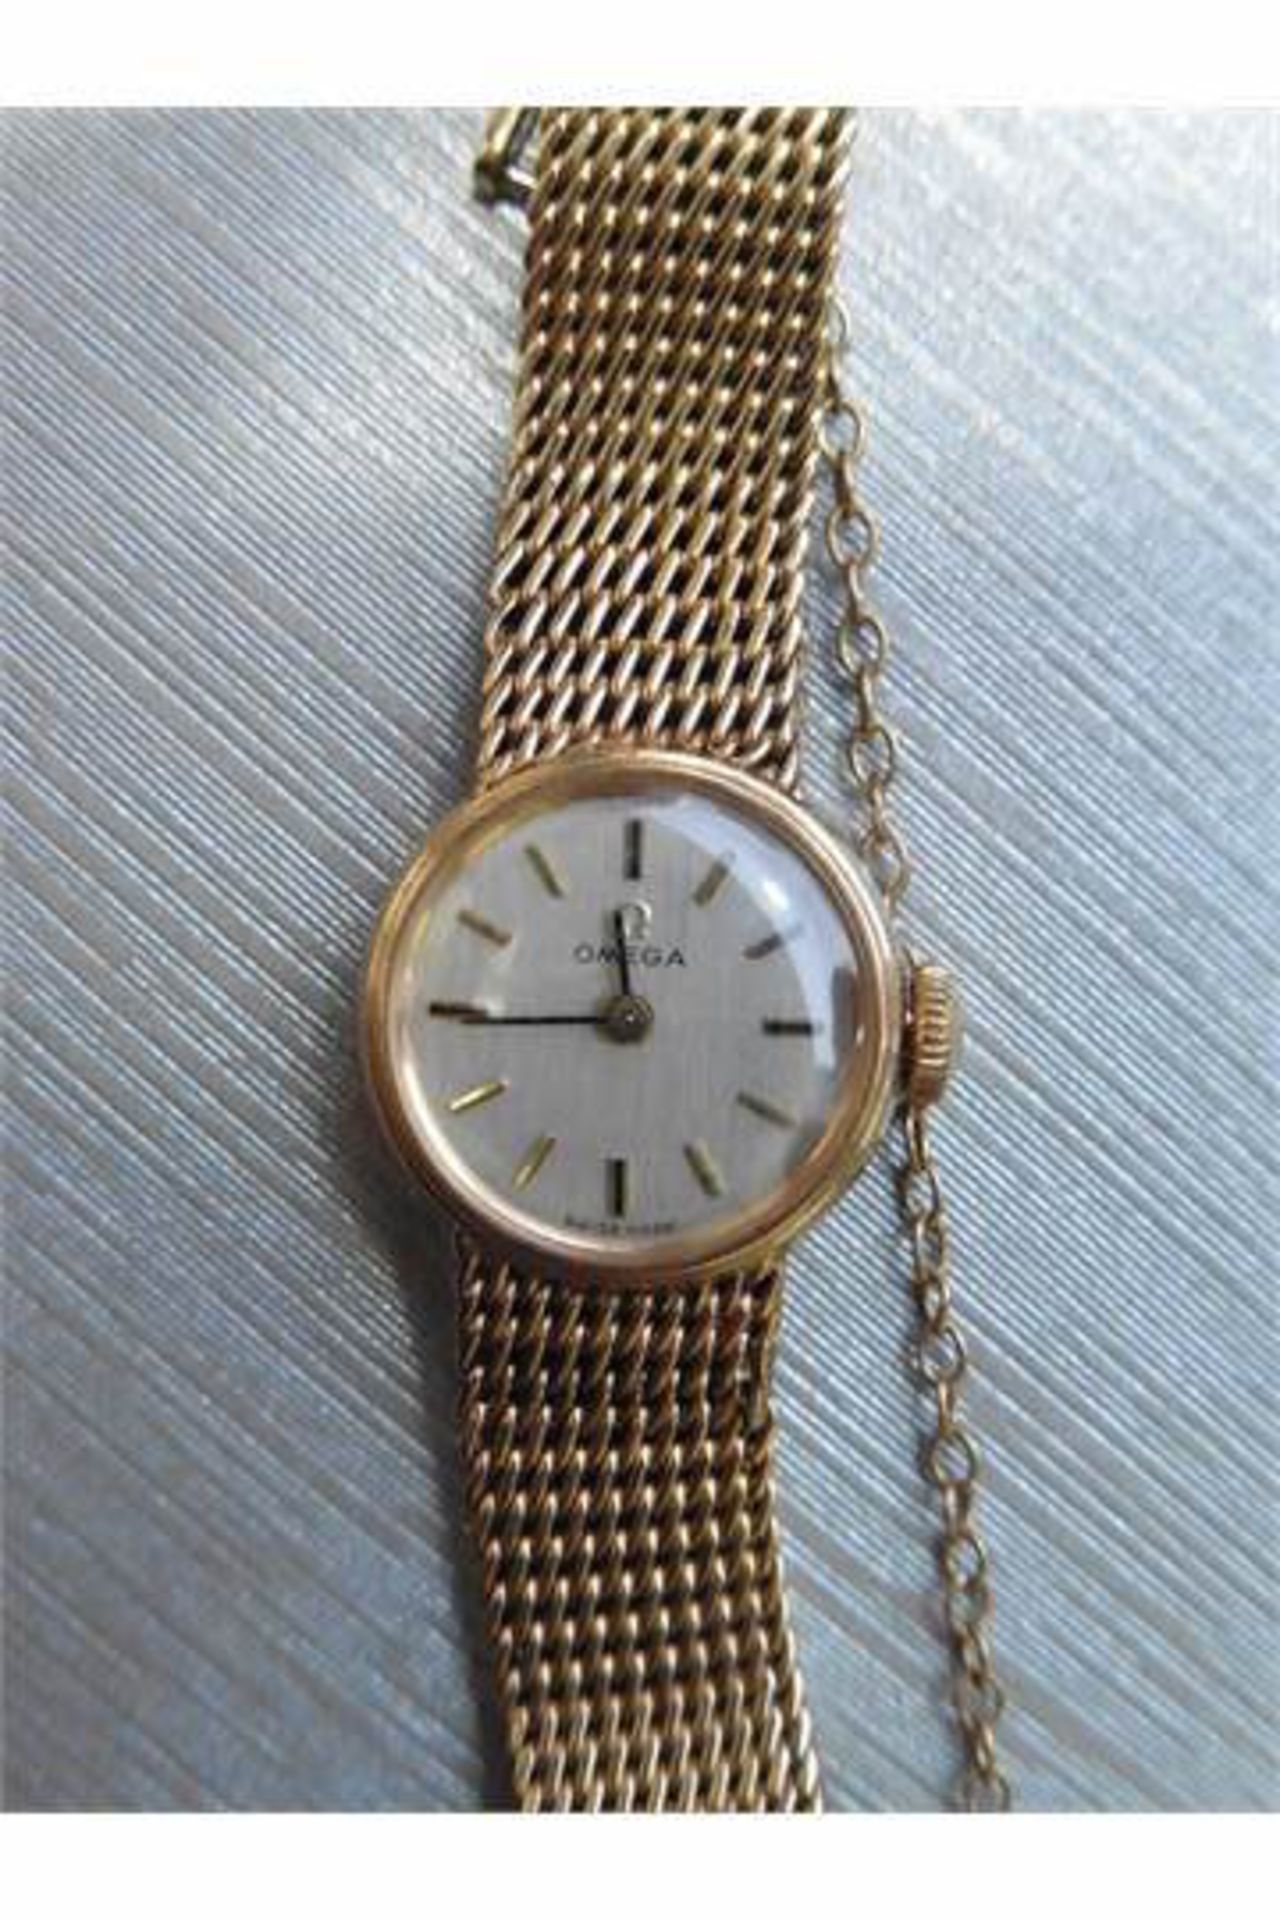 Pre-owned ladies 9ct yellow gold omega watch. Small round face with champagne coloured dial,